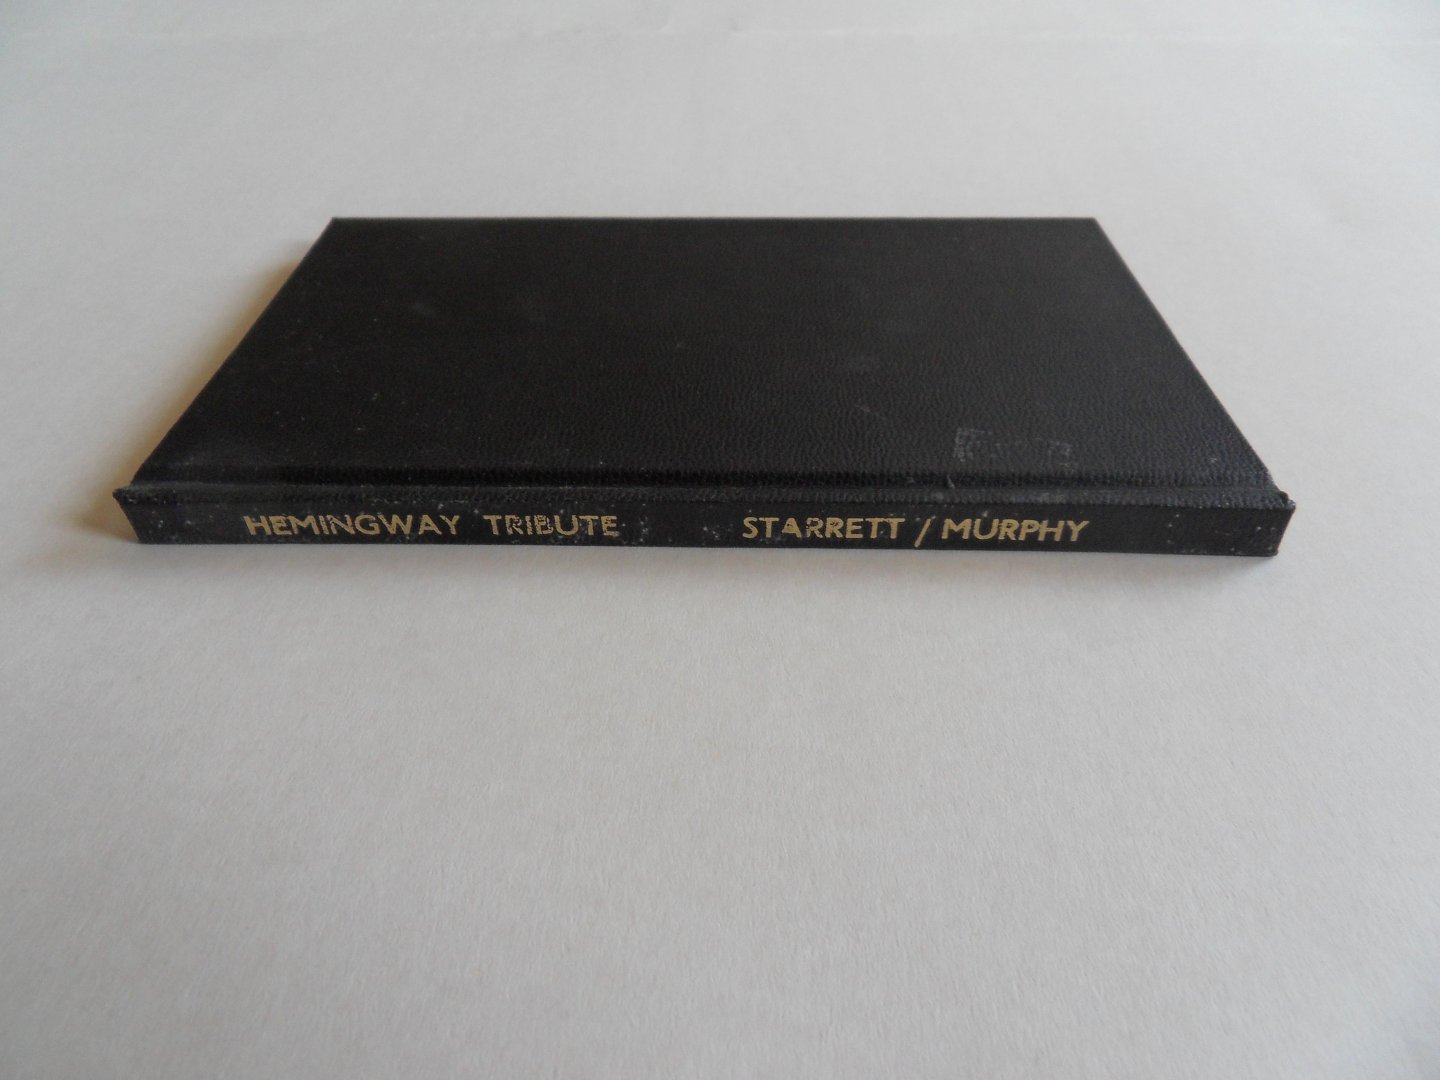 Murphy, Michael; Starrett, Vincent. [ With signed text by Michael Murphy for a friend ]. - Hemingway - A 75th anniversary tribute. [ Worldwide probably only 25 copies exist - see more information ].